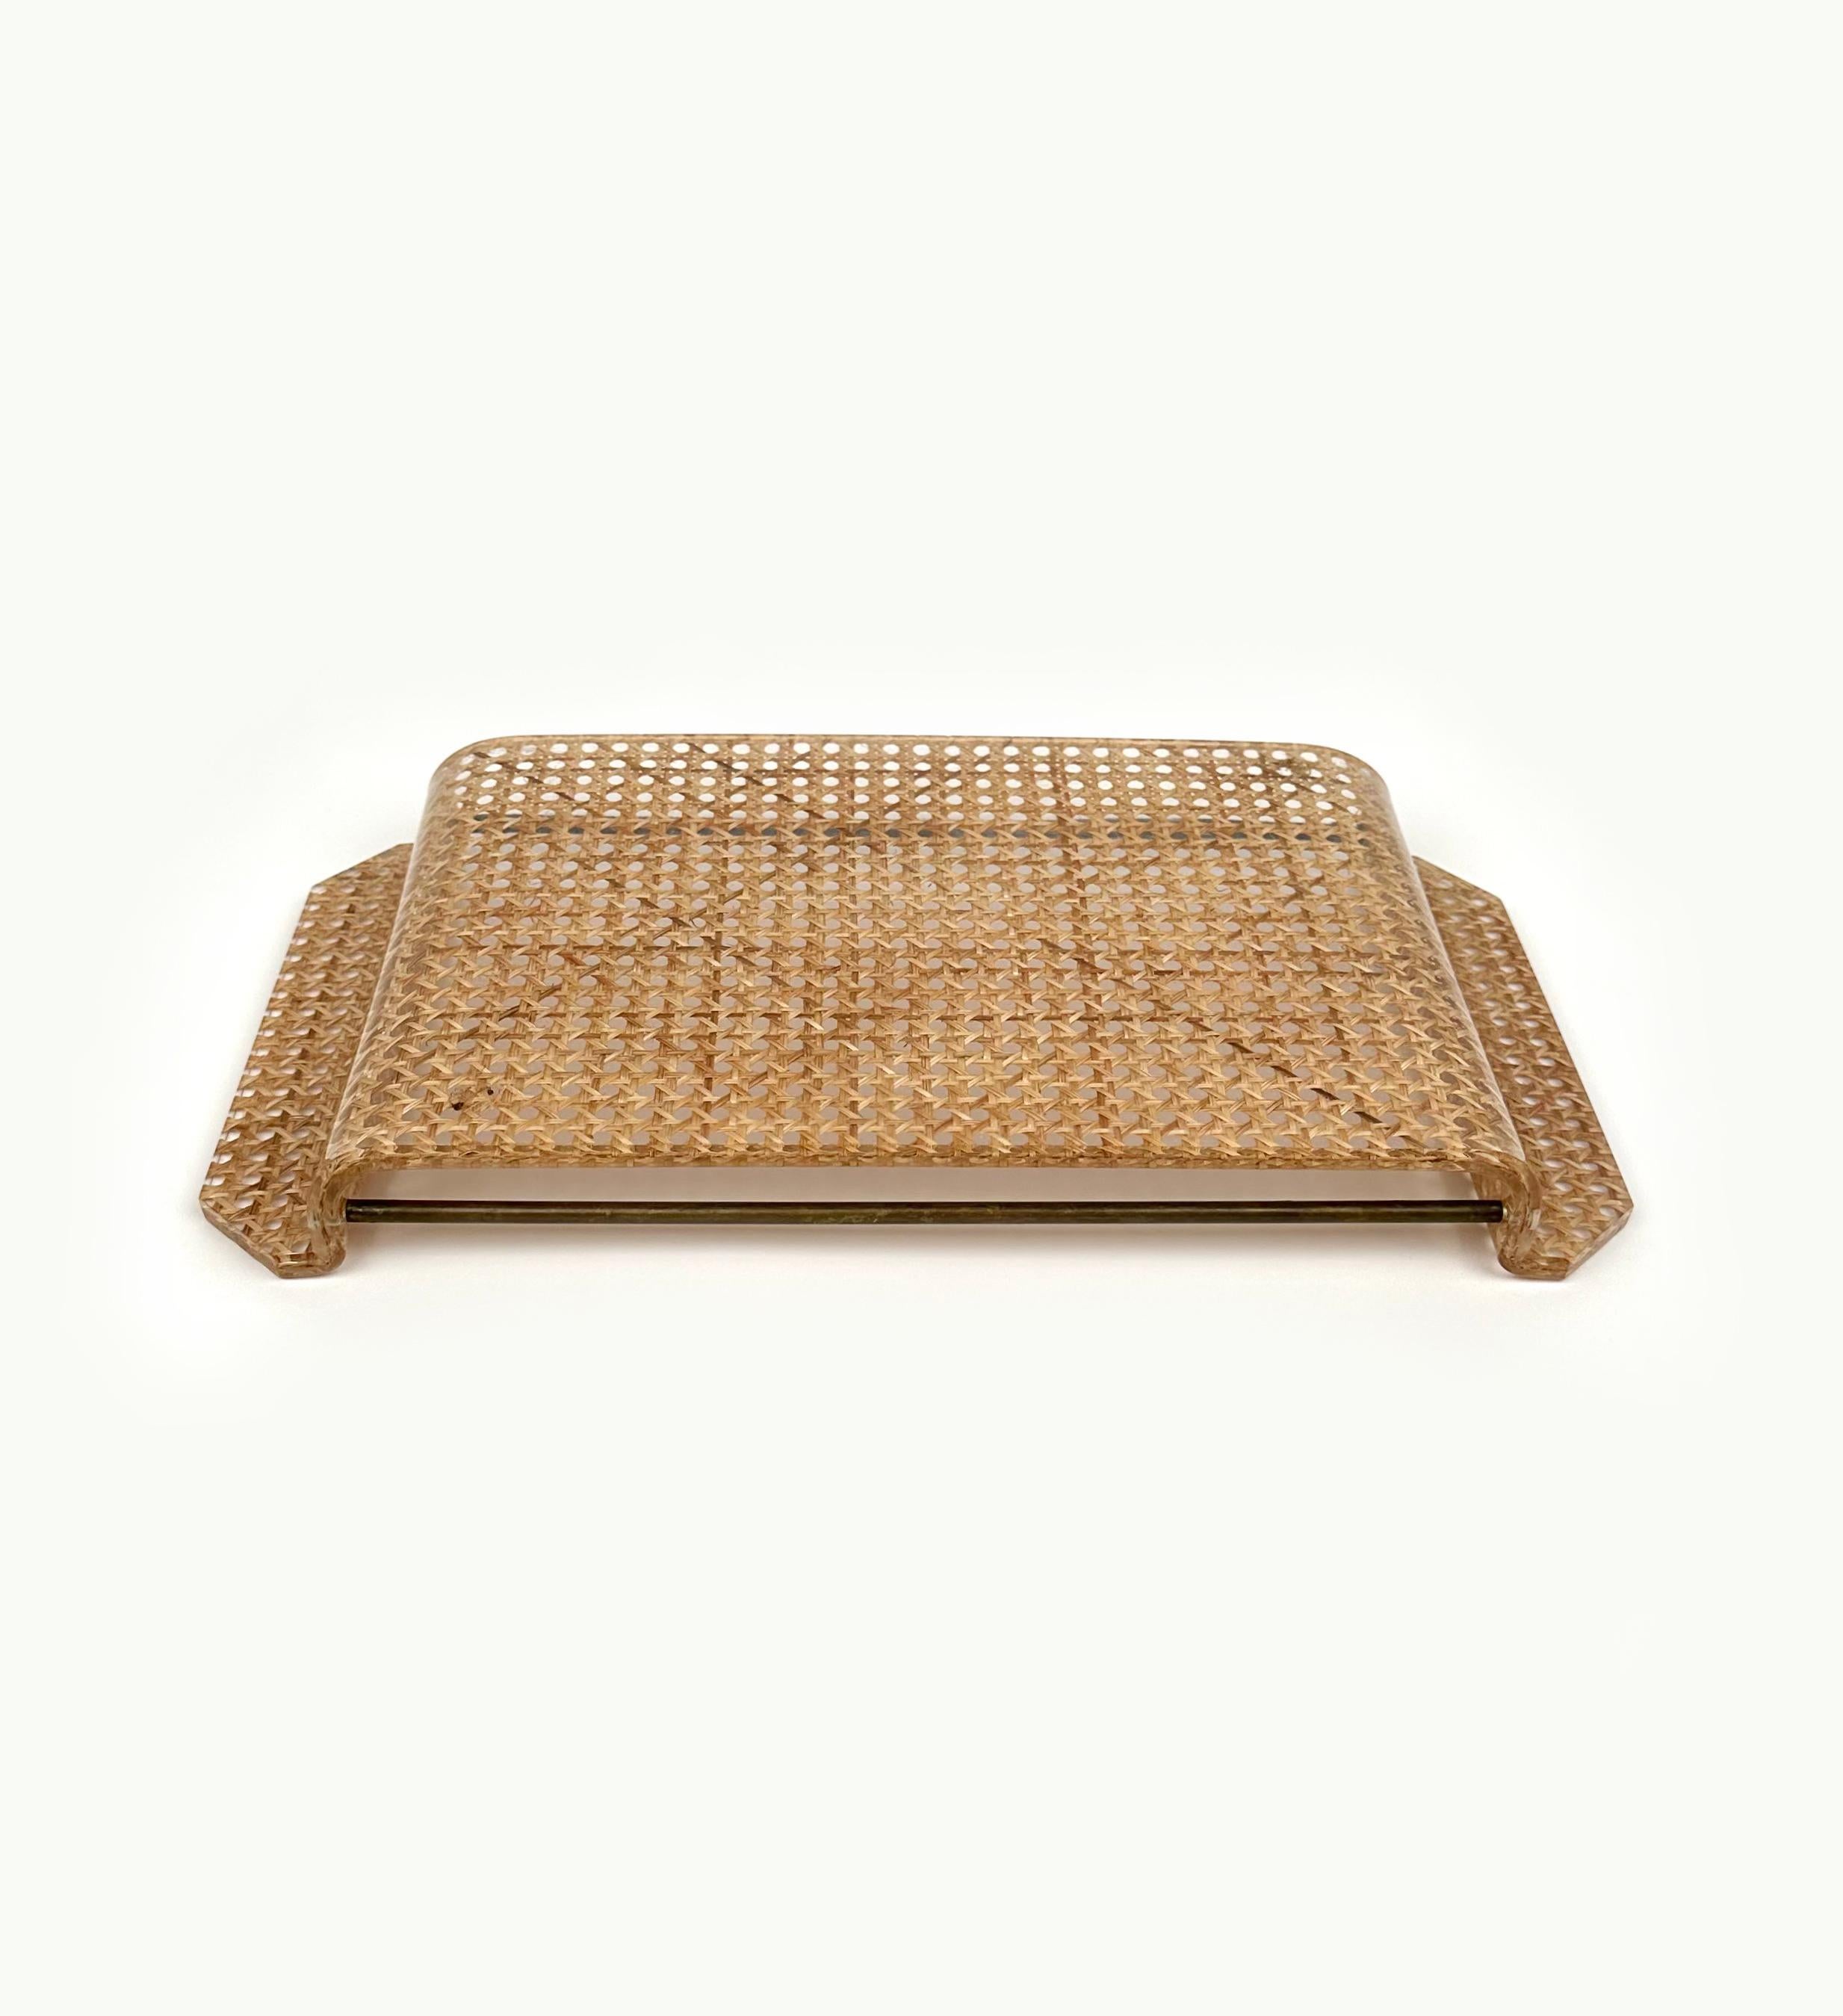 Serving Tray Lucite, Rattan and Brass Christian Dior Style, Italy, 1970s For Sale 2